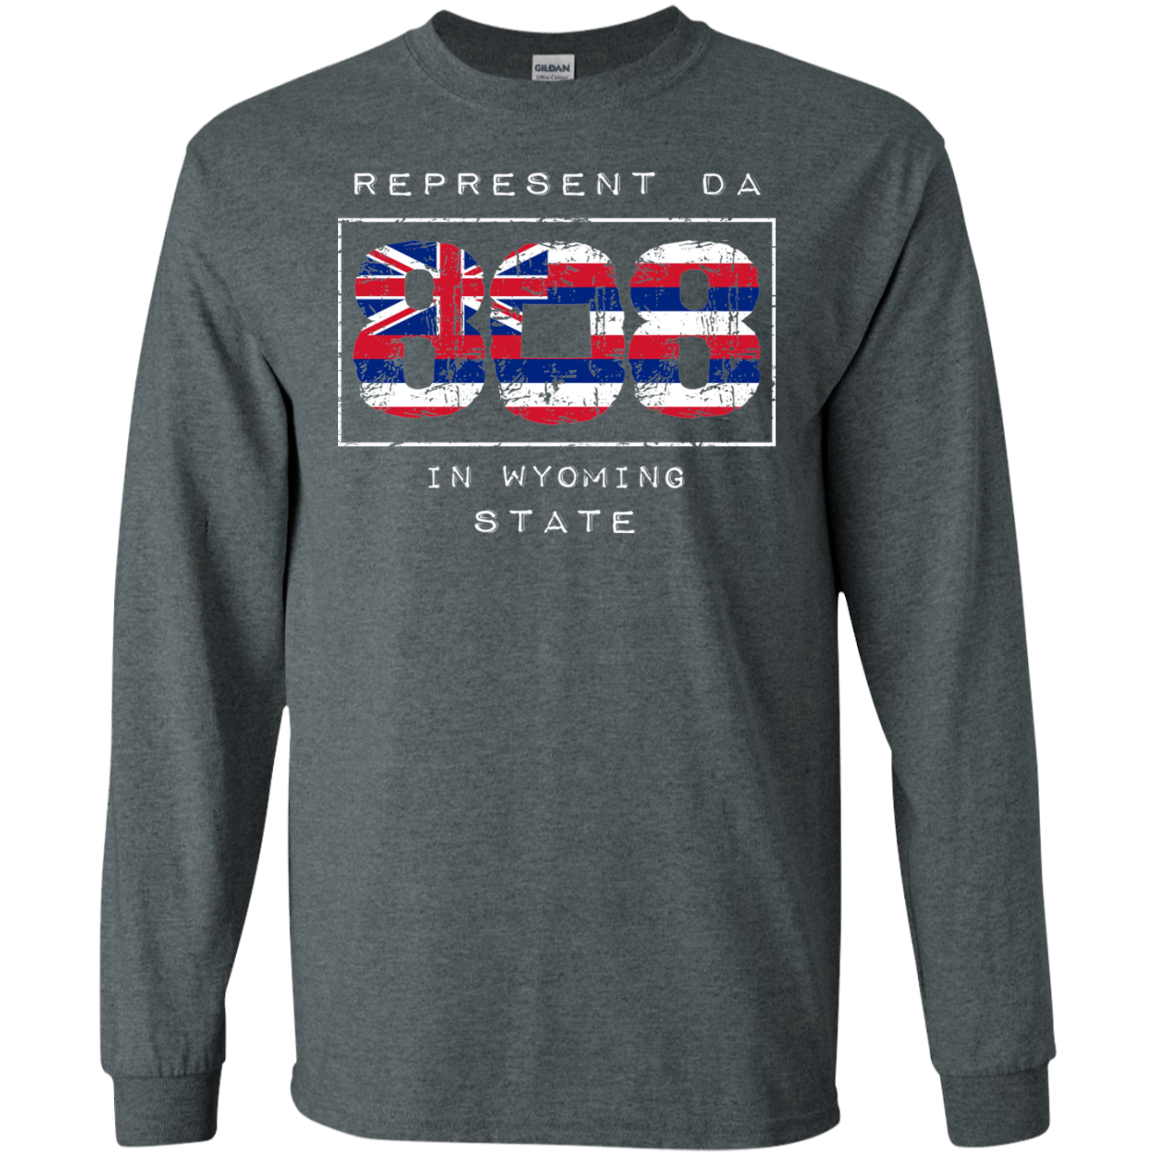 Rep Da 808 In Wyoming State LS Ultra Cotton T-Shirt, T-Shirts, Hawaii Nei All Day